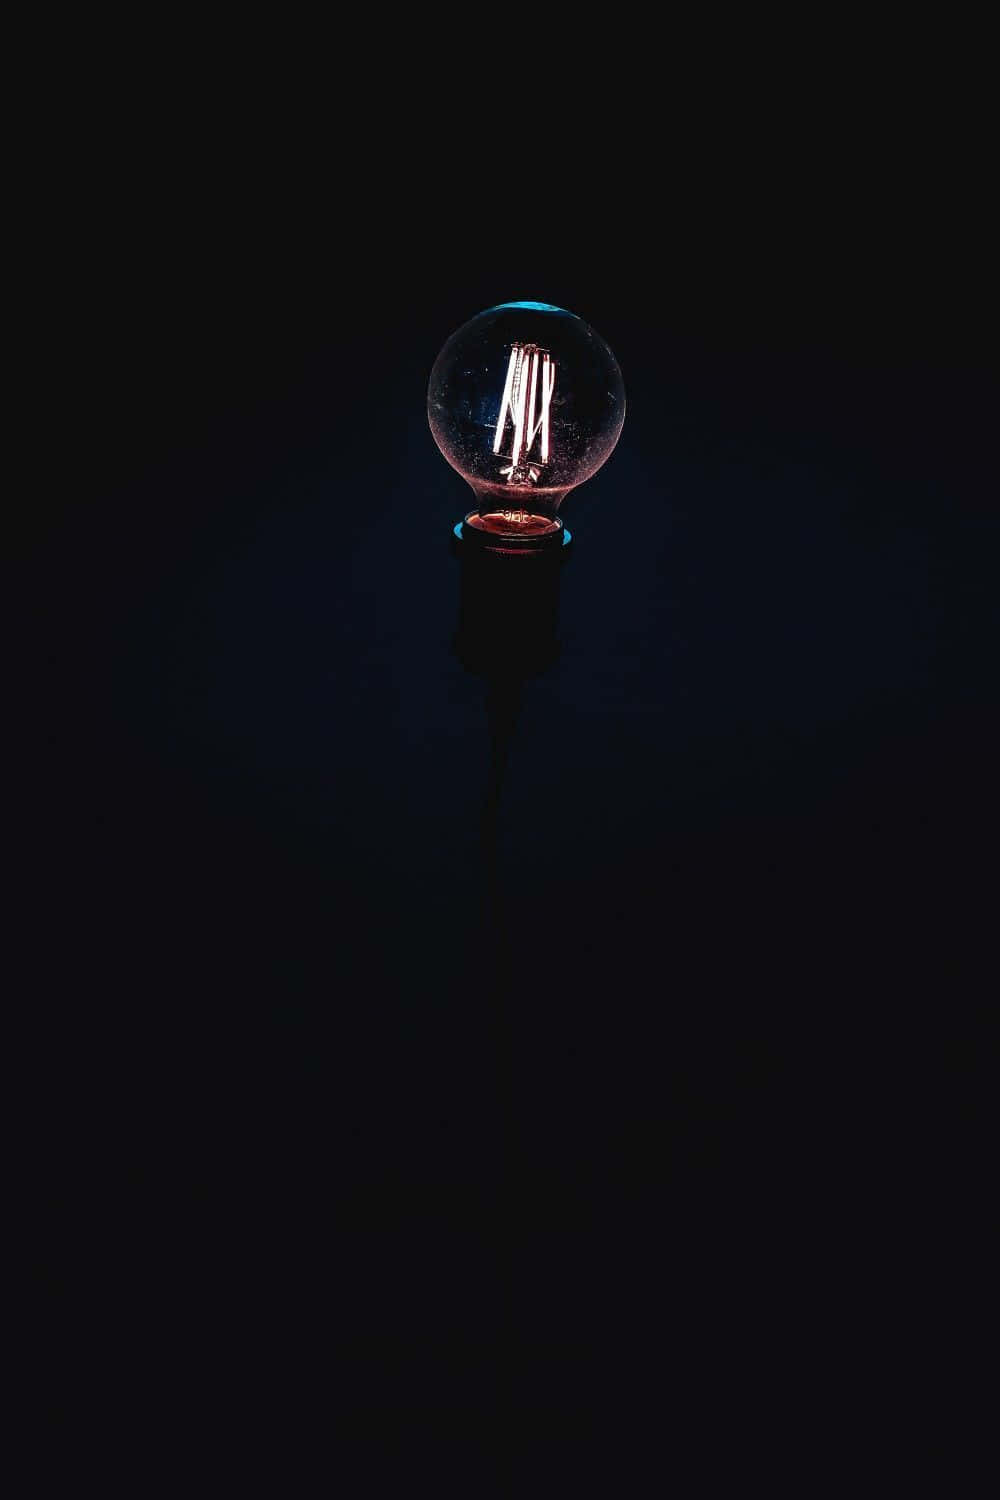 A Light Bulb Is Lit Up In The Dark